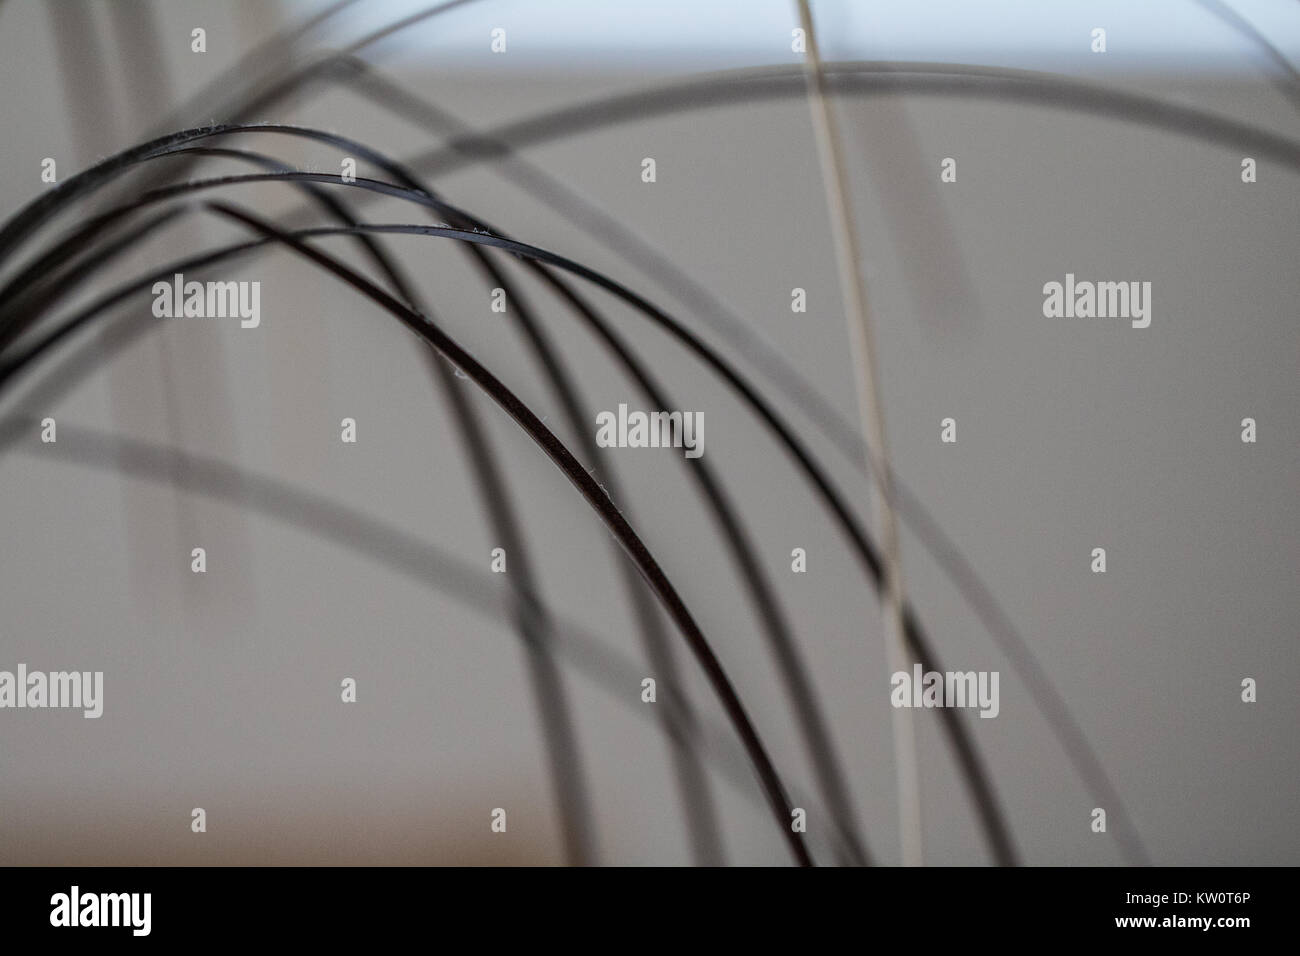 Abstract of grasses in a vase Stock Photo